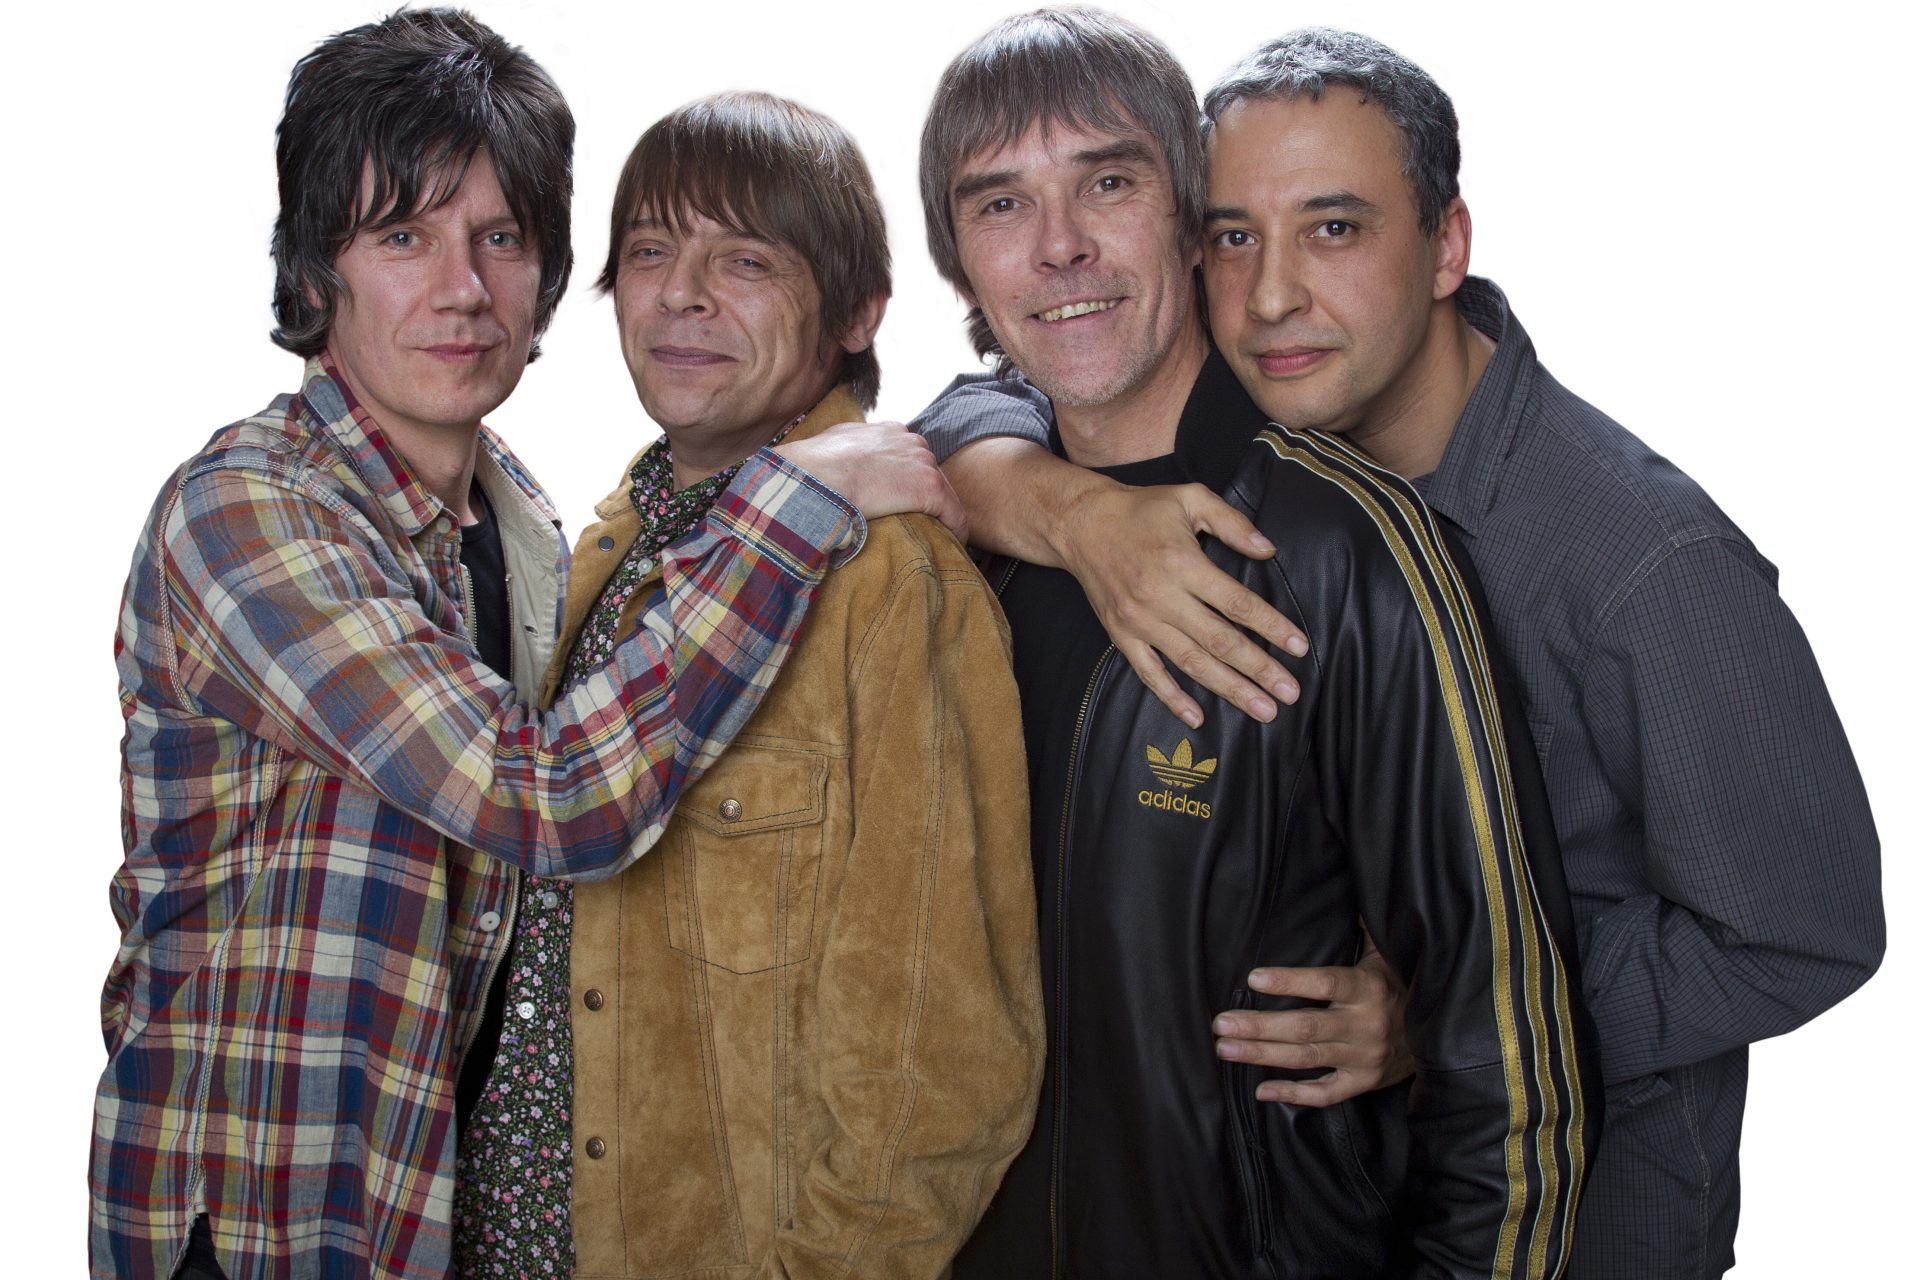 The Stone Roses continued